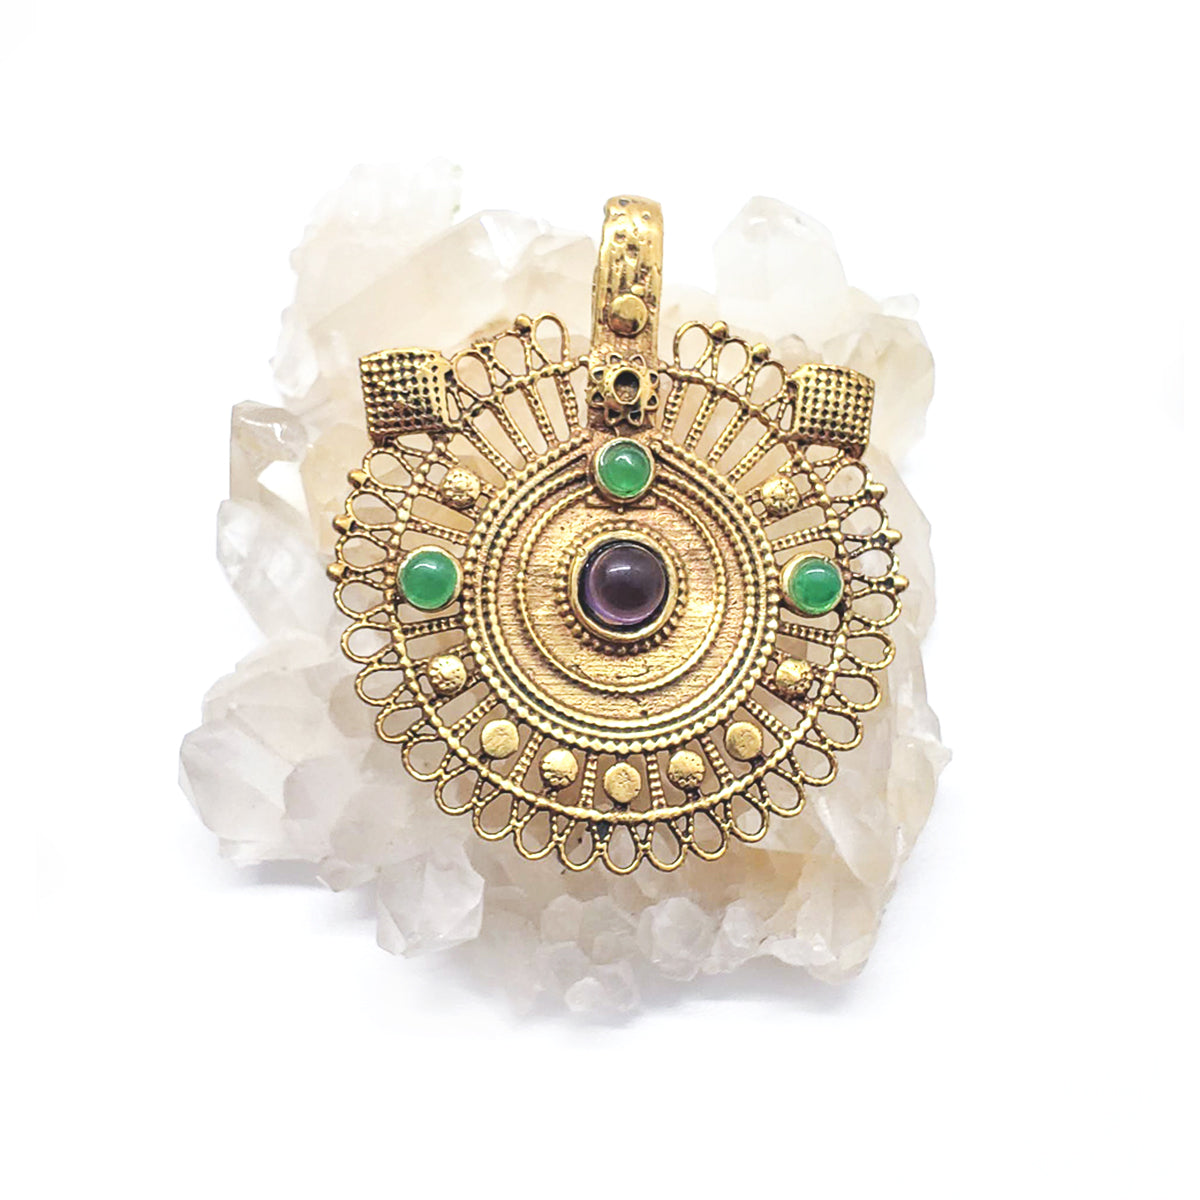 Recycled Brass Bejeweled Statement Pendant - Green Apatite & Amethyst Gemstone